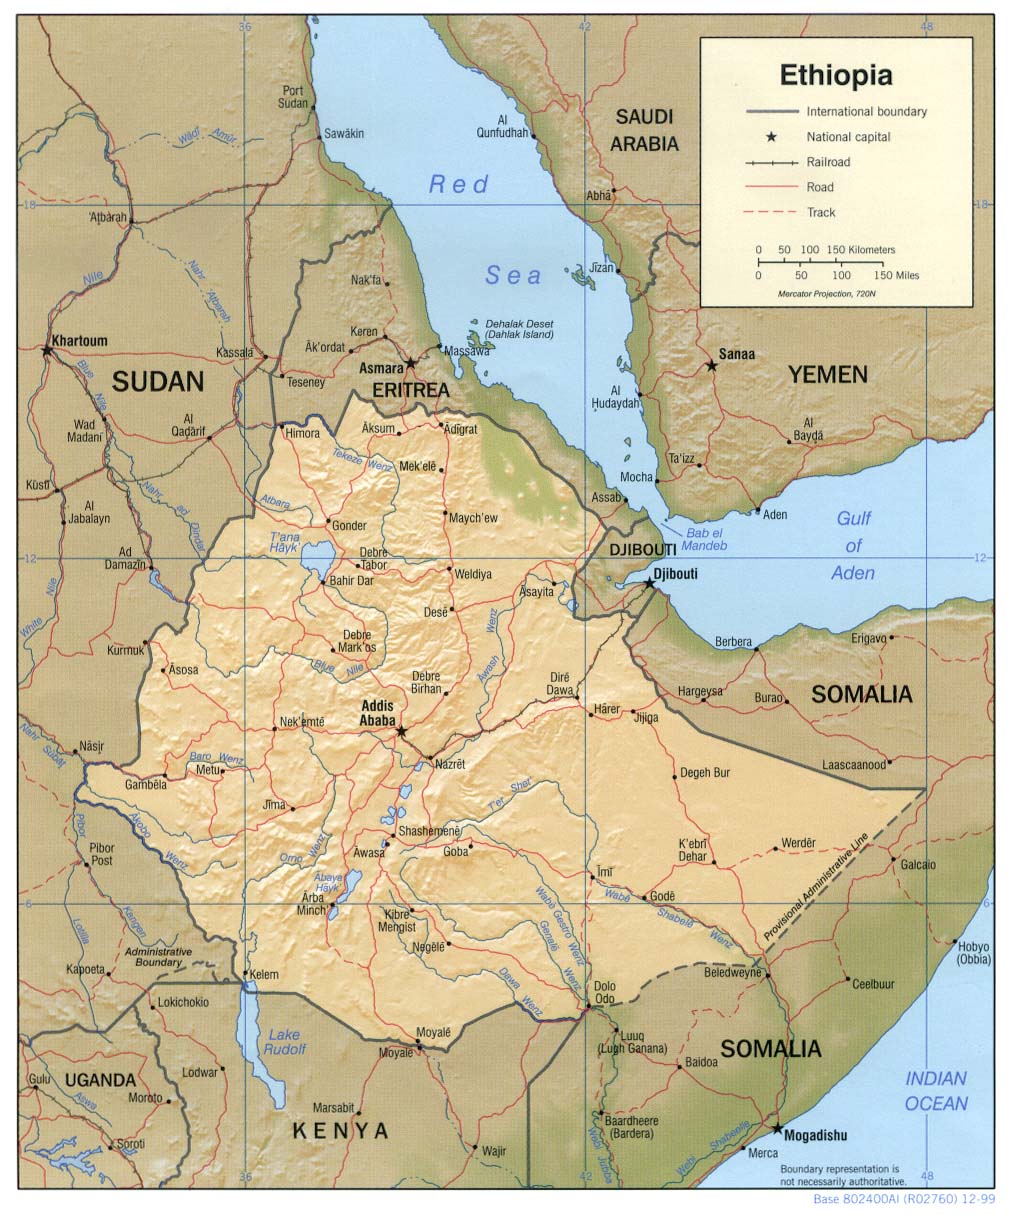 Ethiopia Maps - Perry-Castañeda Map Collection - UT Library Online